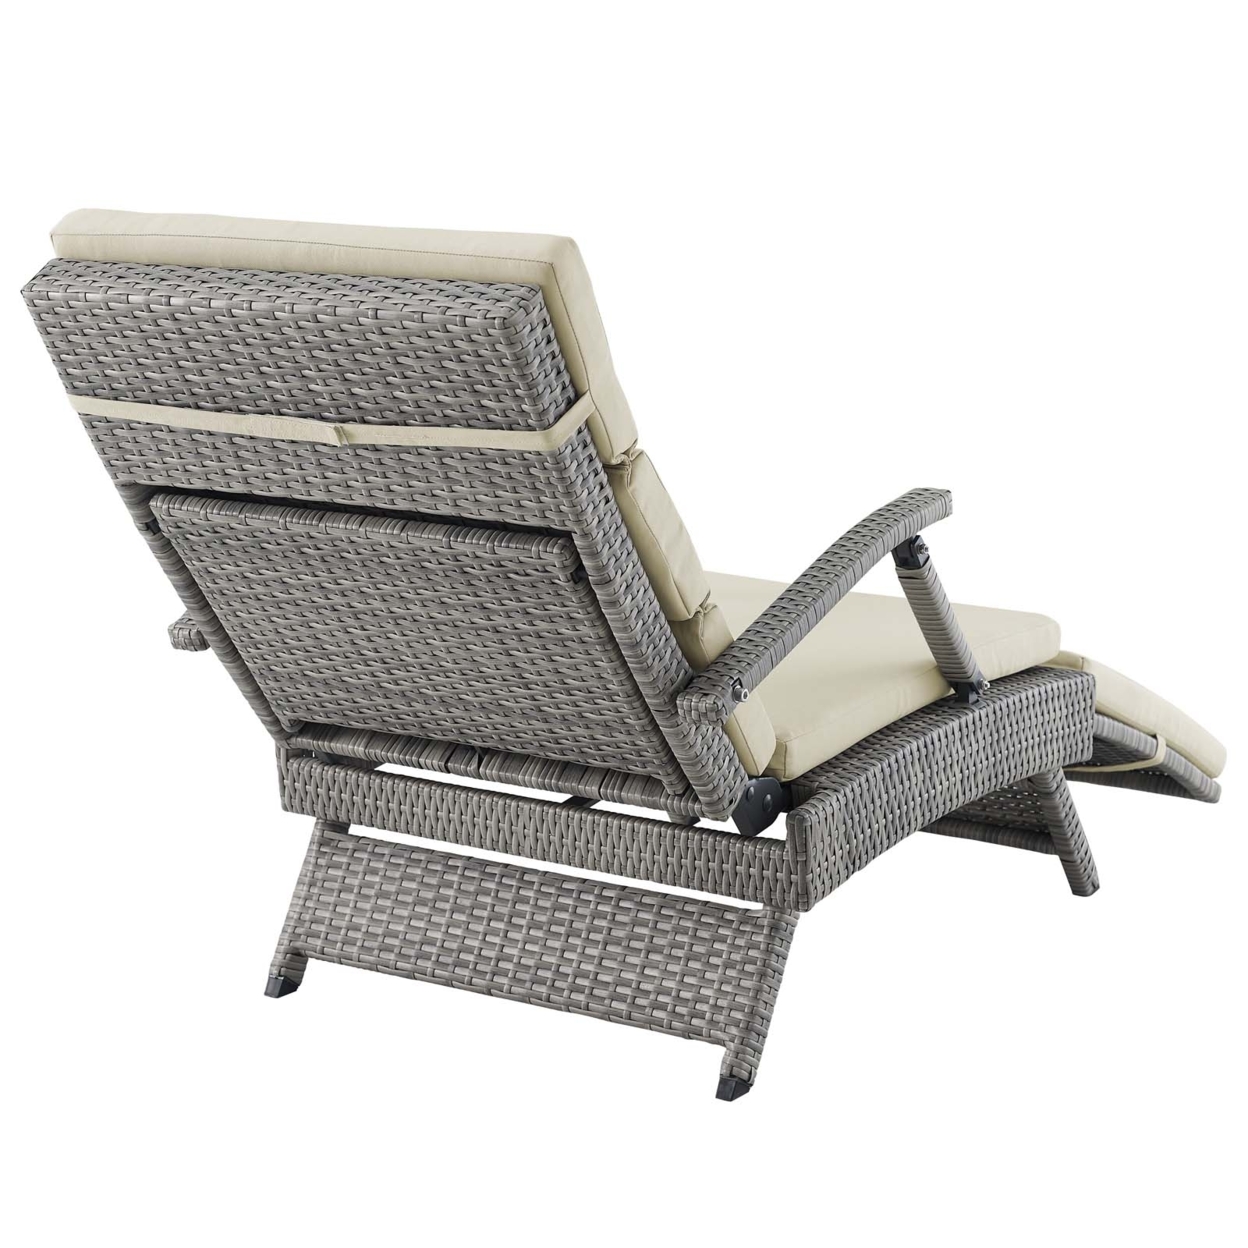 Envisage Chaise Outdoor Patio Wicker Rattan Lounge ChairLight Gray Beige - image 3 of 7